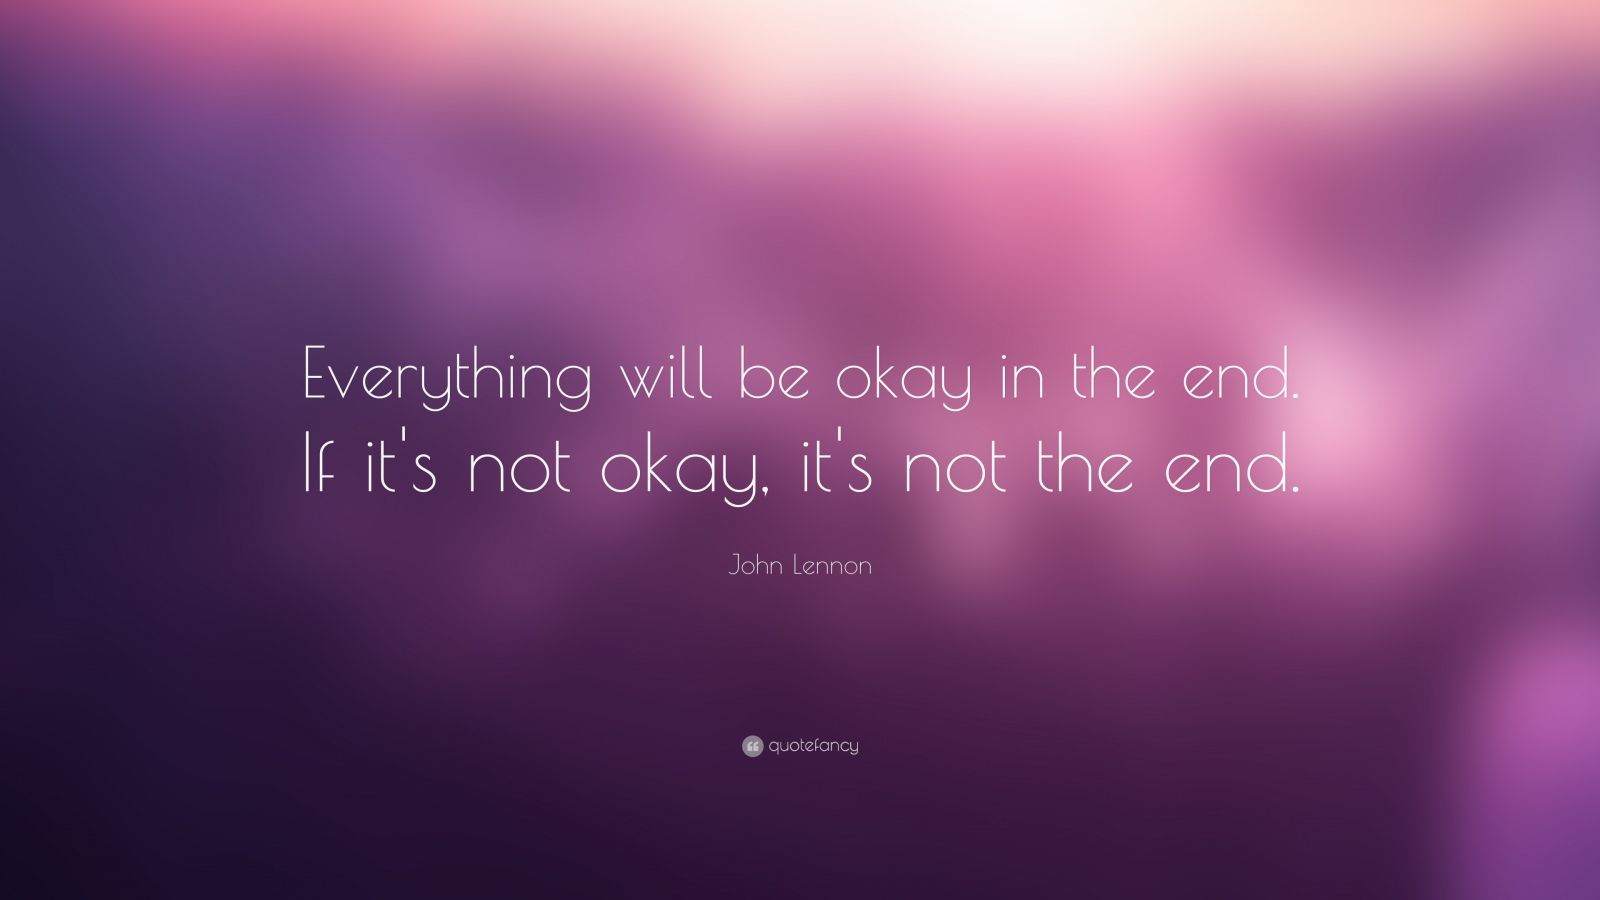 John Lennon Quote: “Everything will be okay in the end. If it's not